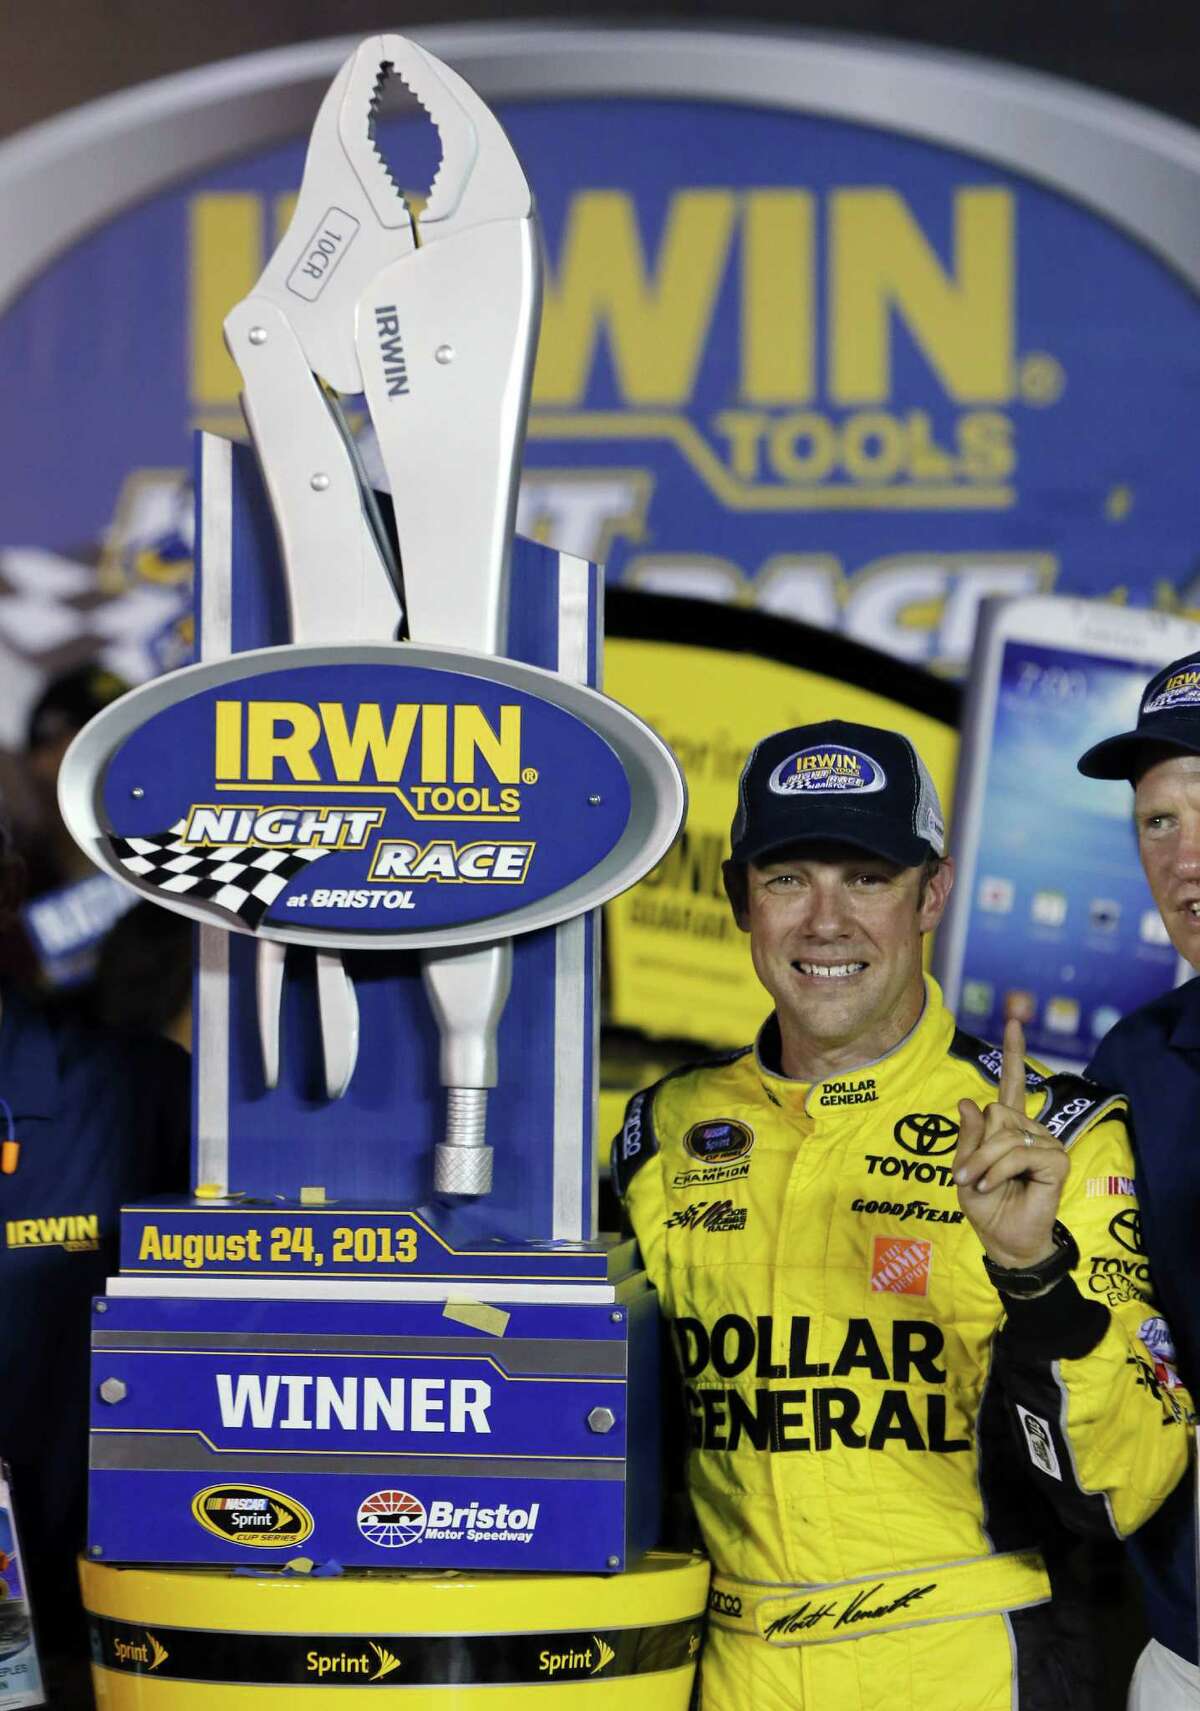 Matt Kenseth enjoys the moment with the trophy in Victory Lane after his Sprint Cup victory Saturday night at Bristol Motor Speedway.